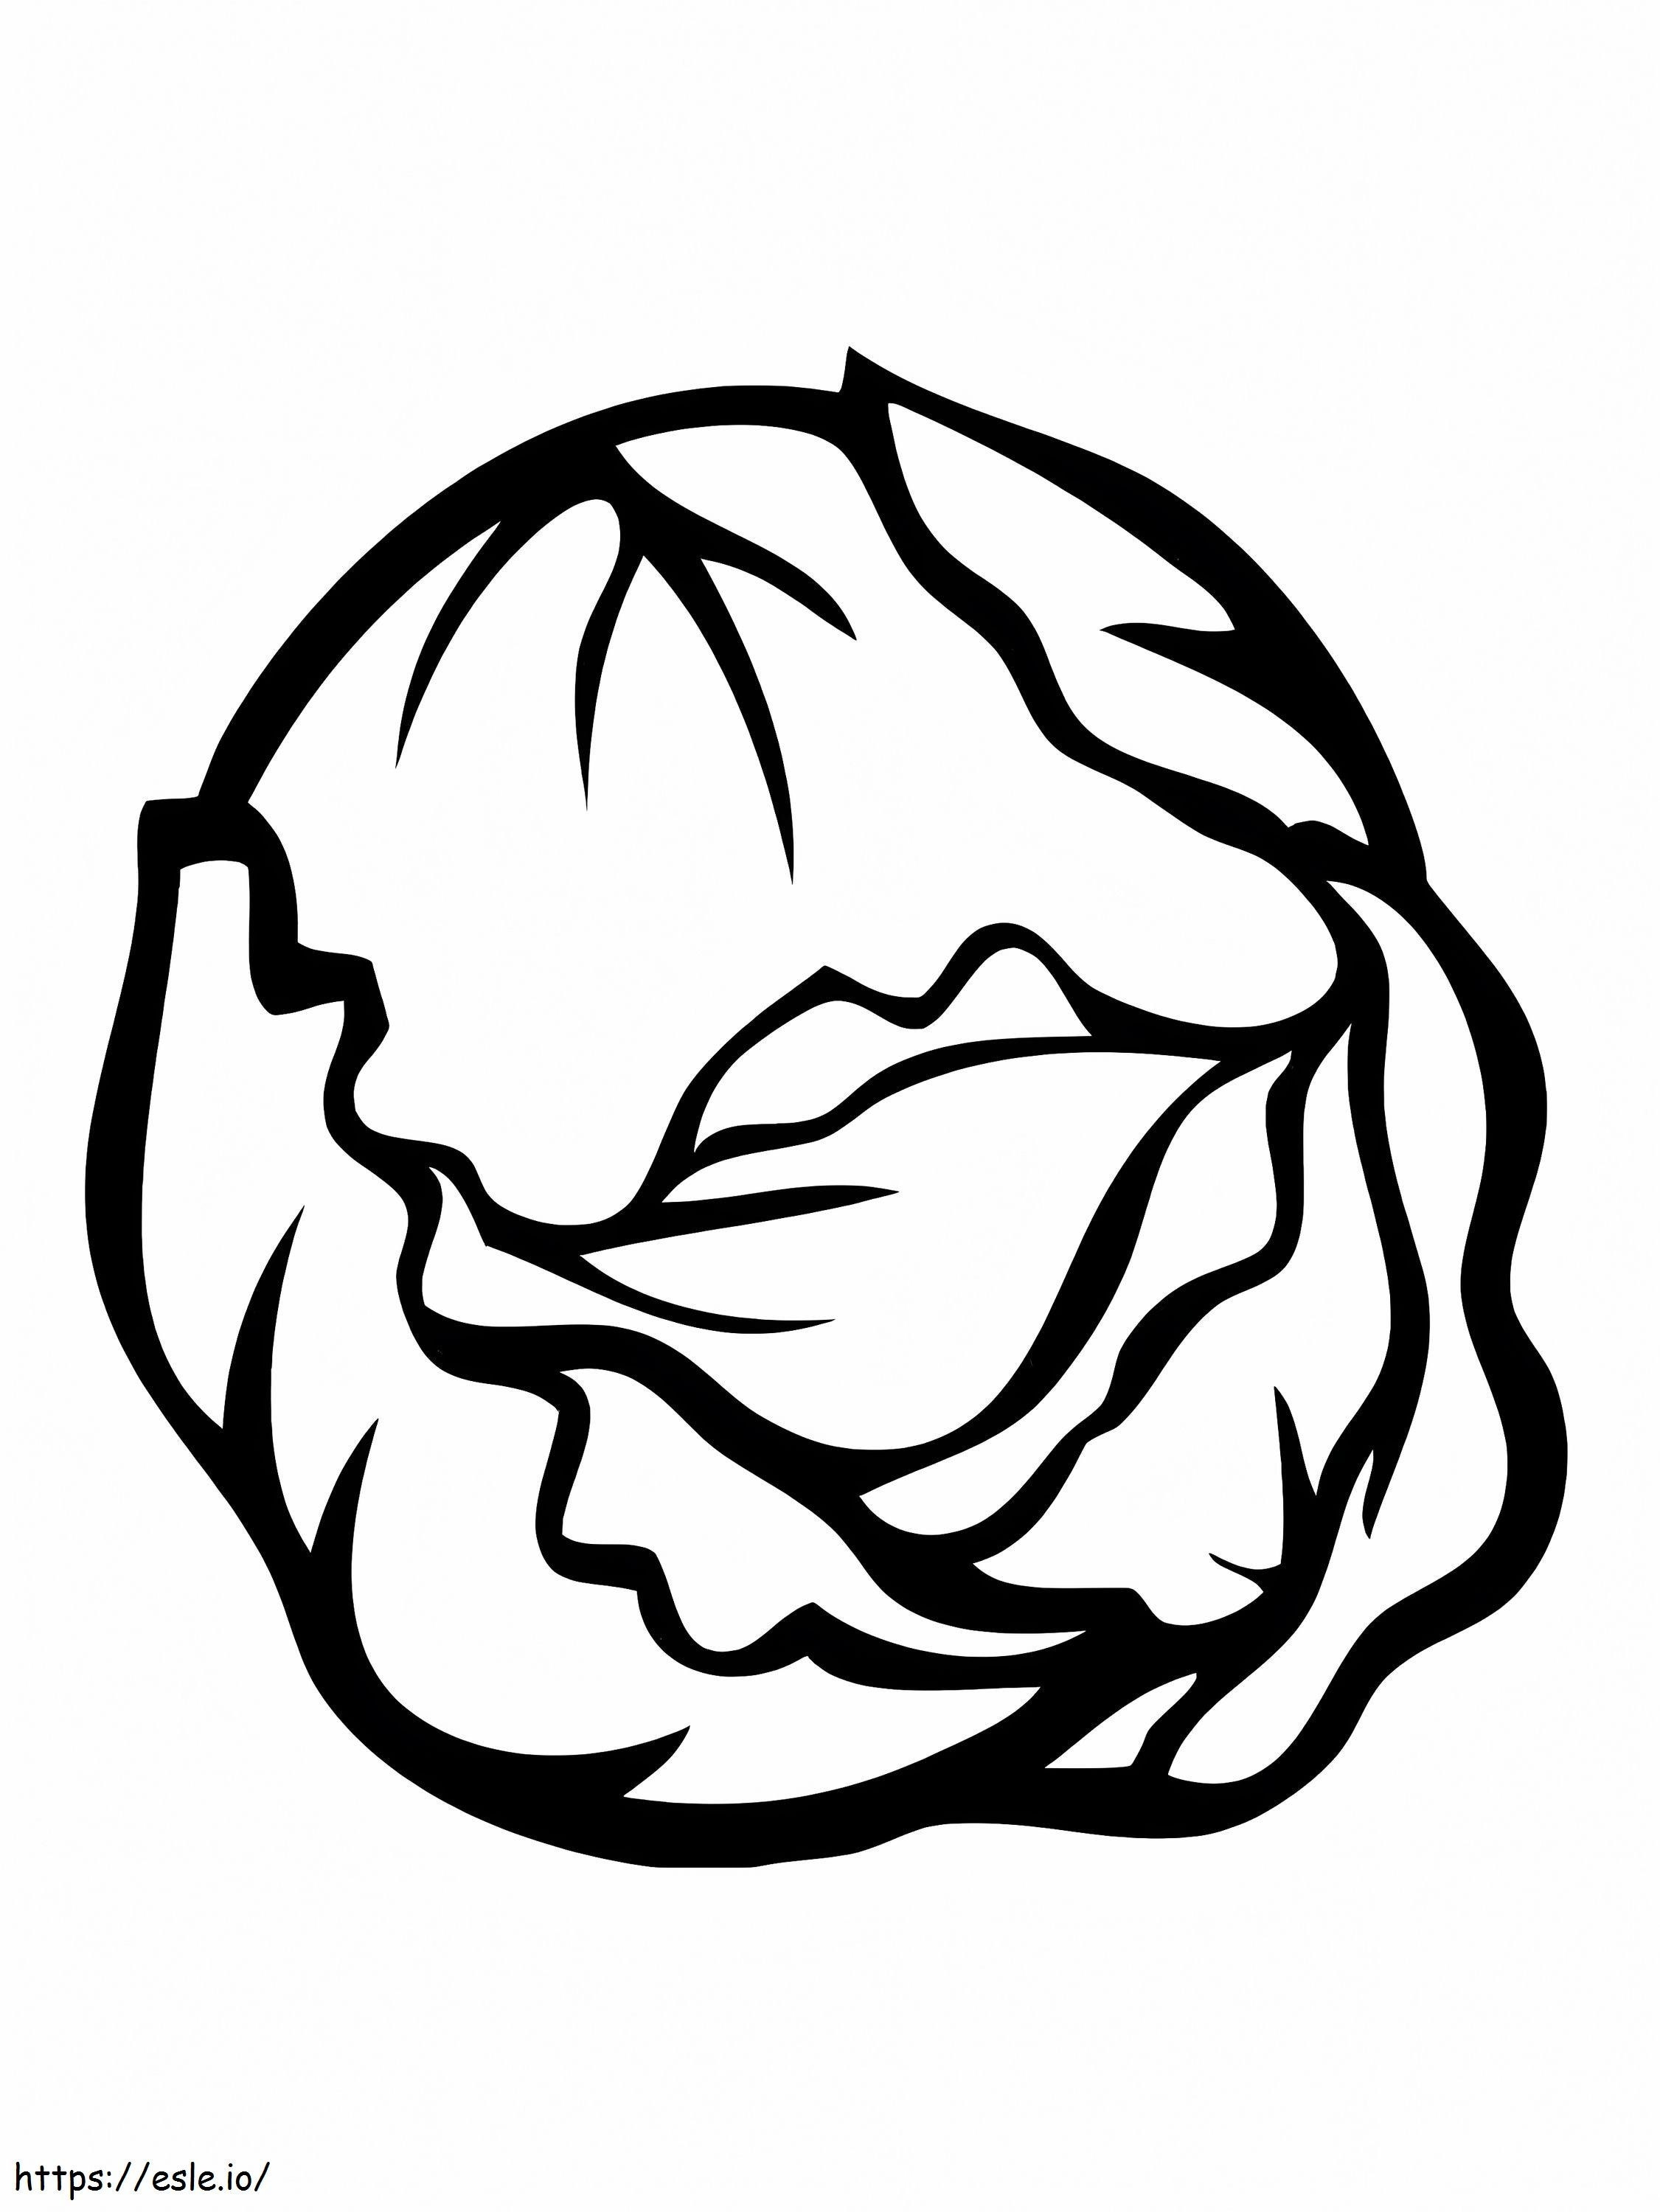 Normal Cabbage 2 coloring page